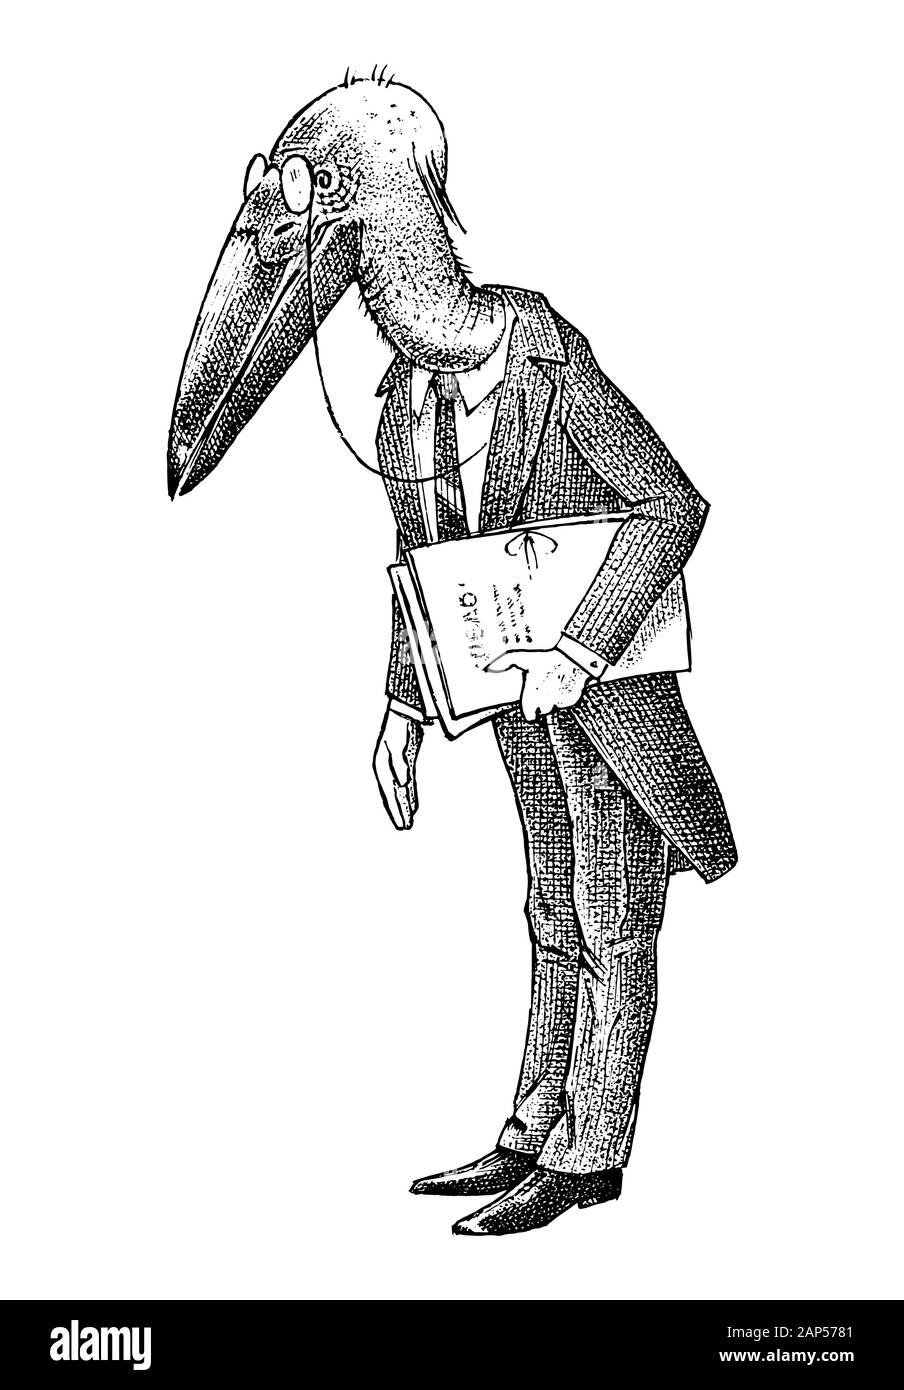 Bird man with a marabou head. Lawyer in a classic office suit with documents. Hand drawn fashionable stork. Engraved old monochrome sketch. Stock Vector